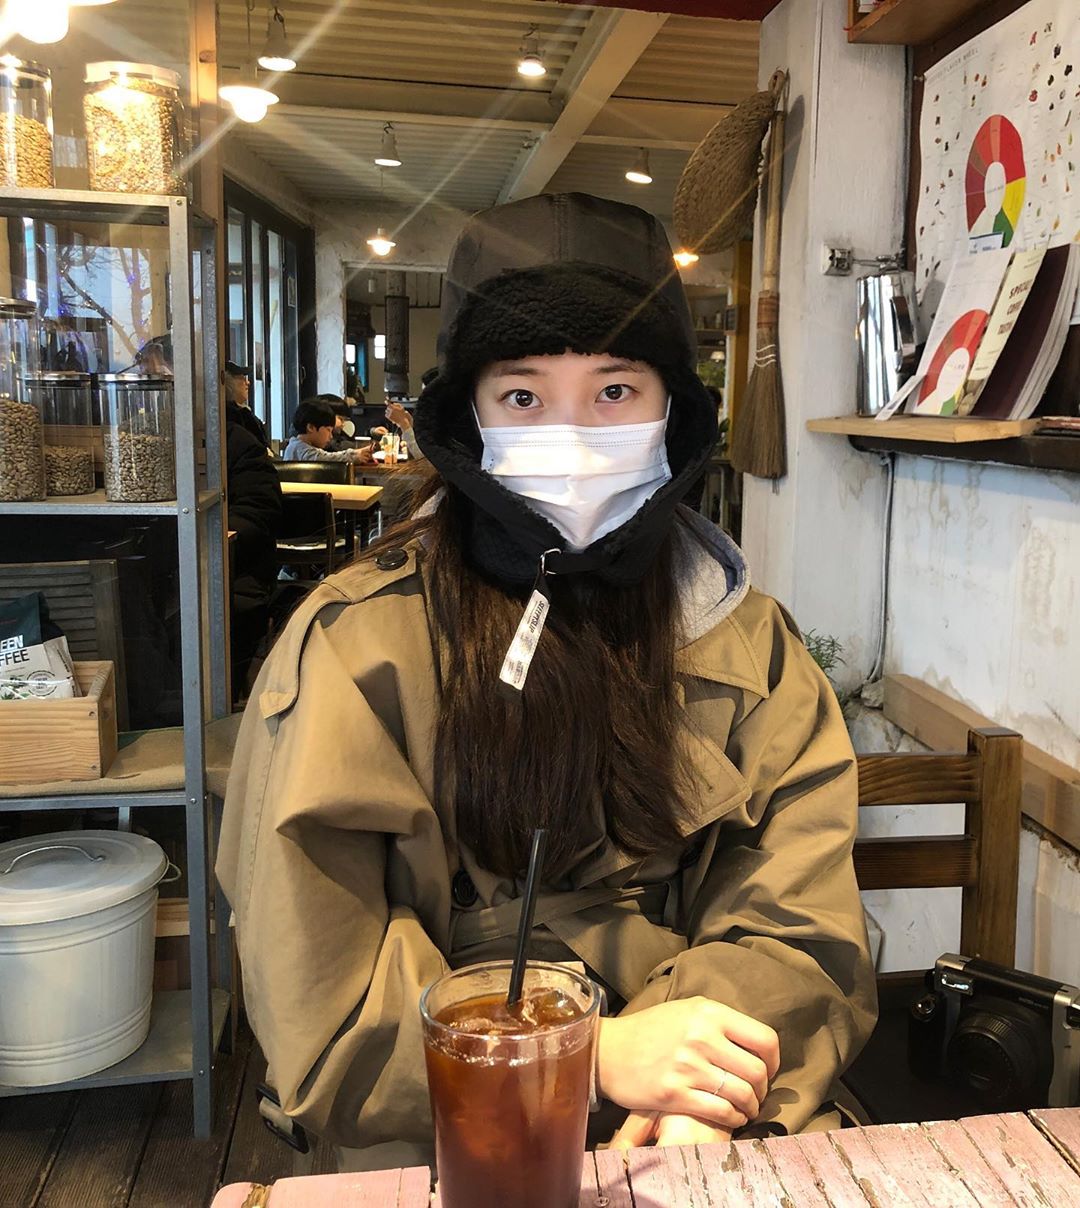 Bae Suzy has reported on the latest.On the 9th, Bae Suzy posted two photos on his Instagram and posted Last year.In the photo, Bae Suzy is wearing a black night hat in a cafe and looking at the camera wearing a white mask; Bae Suzy is wearing a khaki coat.There is also a film camera on the left chair, and an ice americano on the table.Bae Suzy will appear in the movie Baekdusan, which will be released on the 19th.Photo = Bae Suzy Instagram